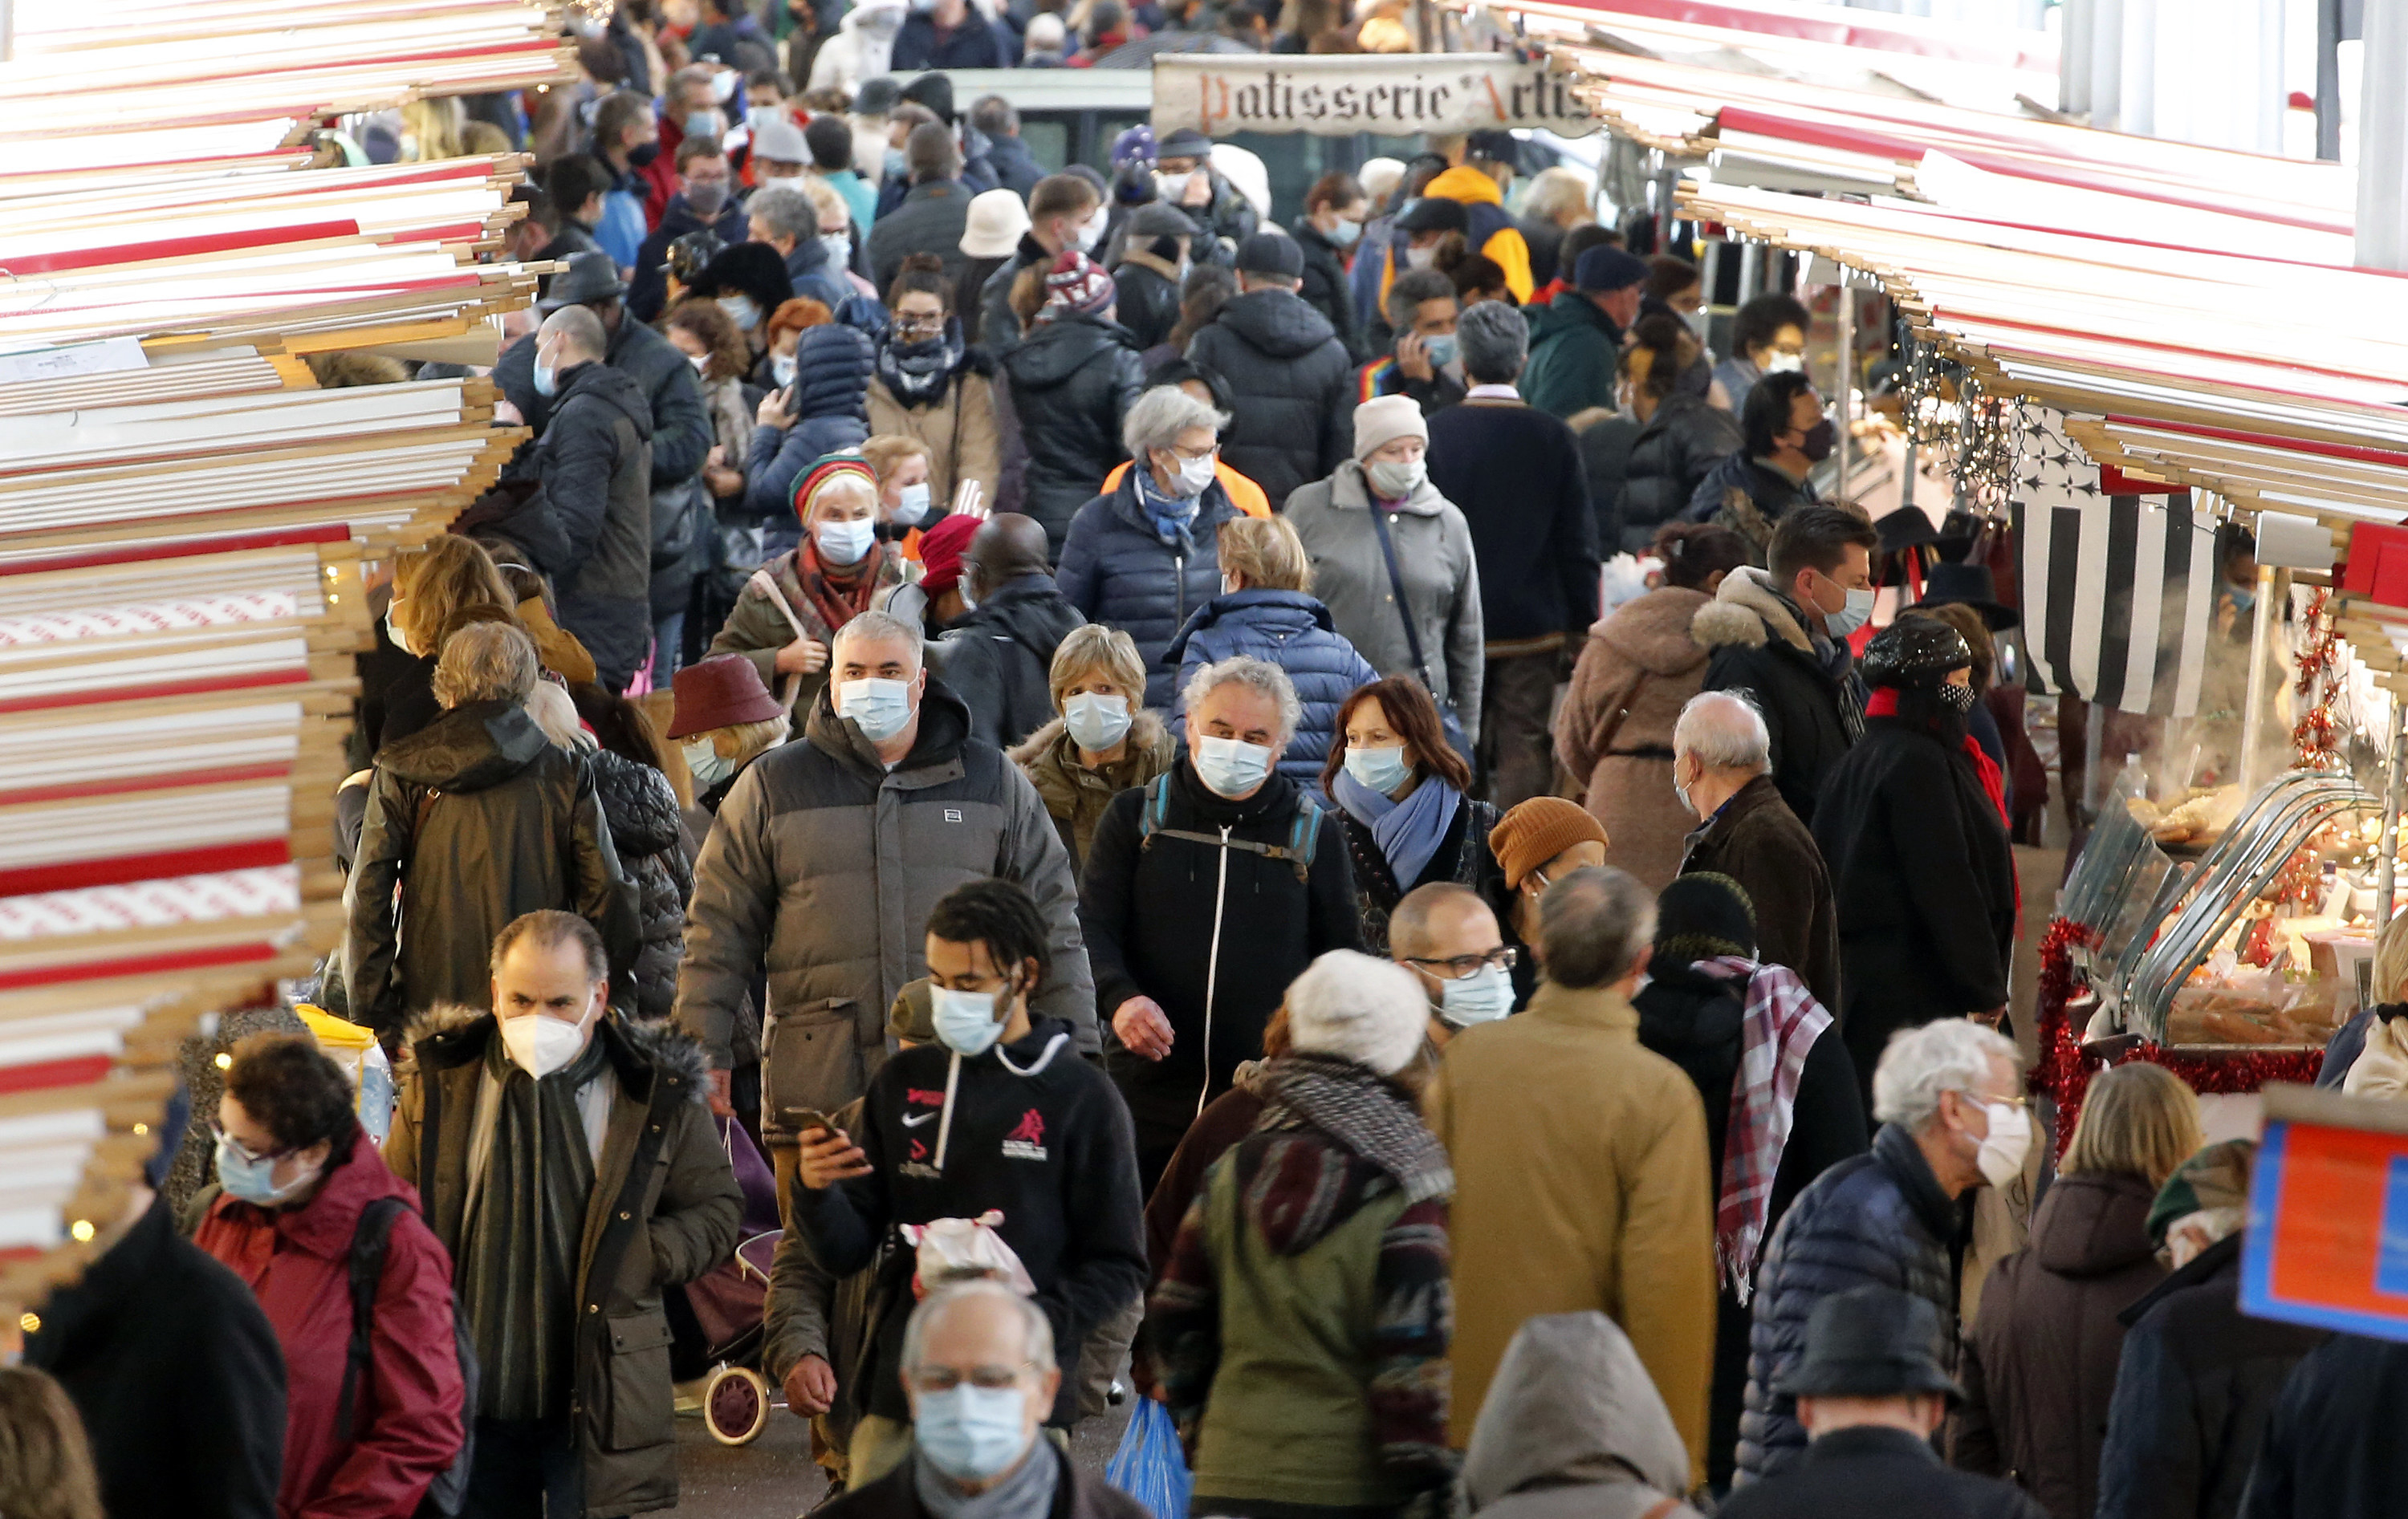 A crowd of people walk with face masks on